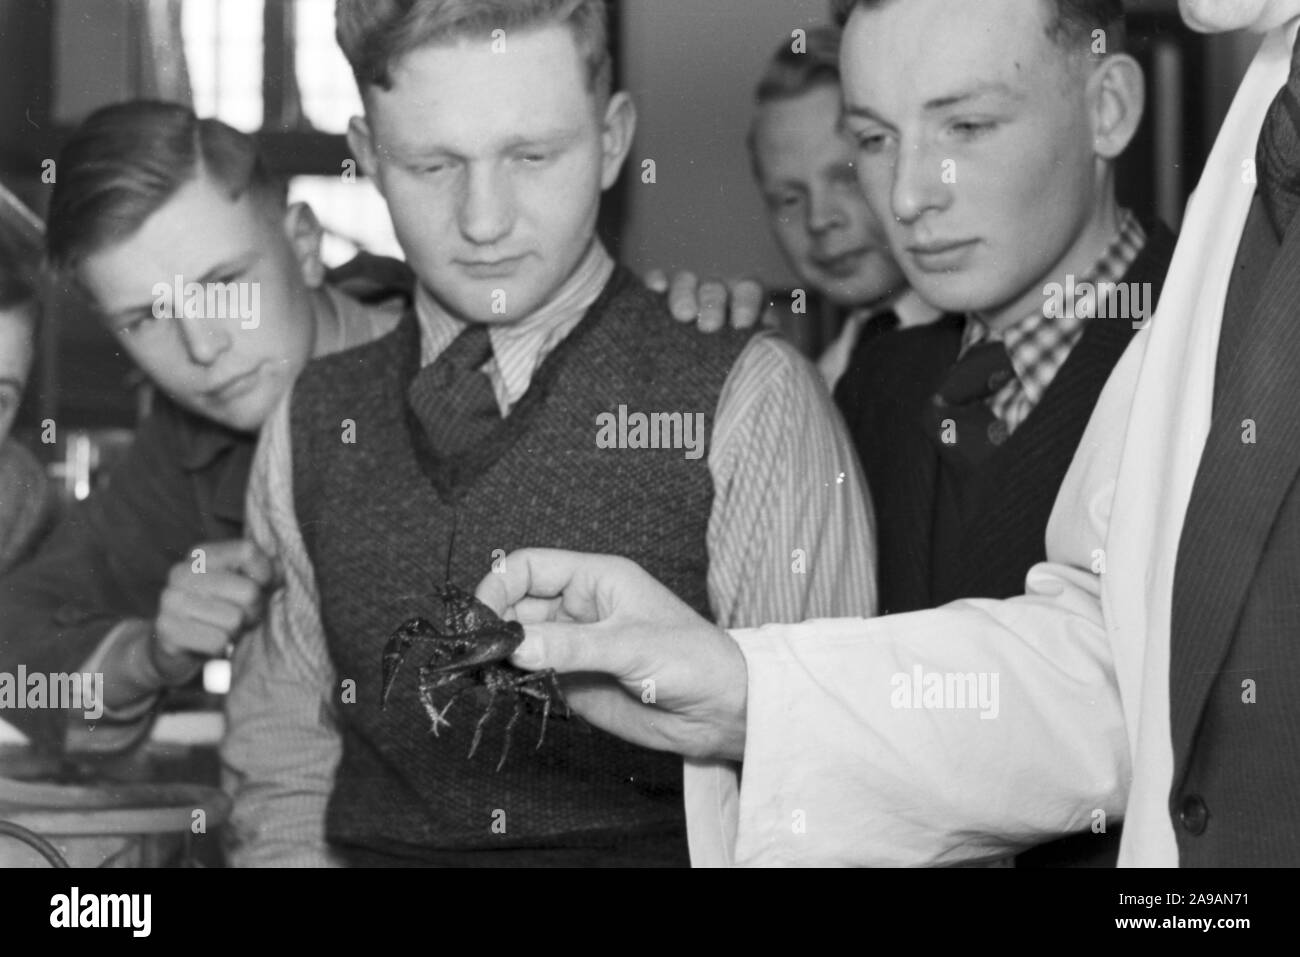 Fishery engineers doing a tutorial at the Reichsanstalt fuer Fischerei in Berlin, Germany 1930s. Stock Photo